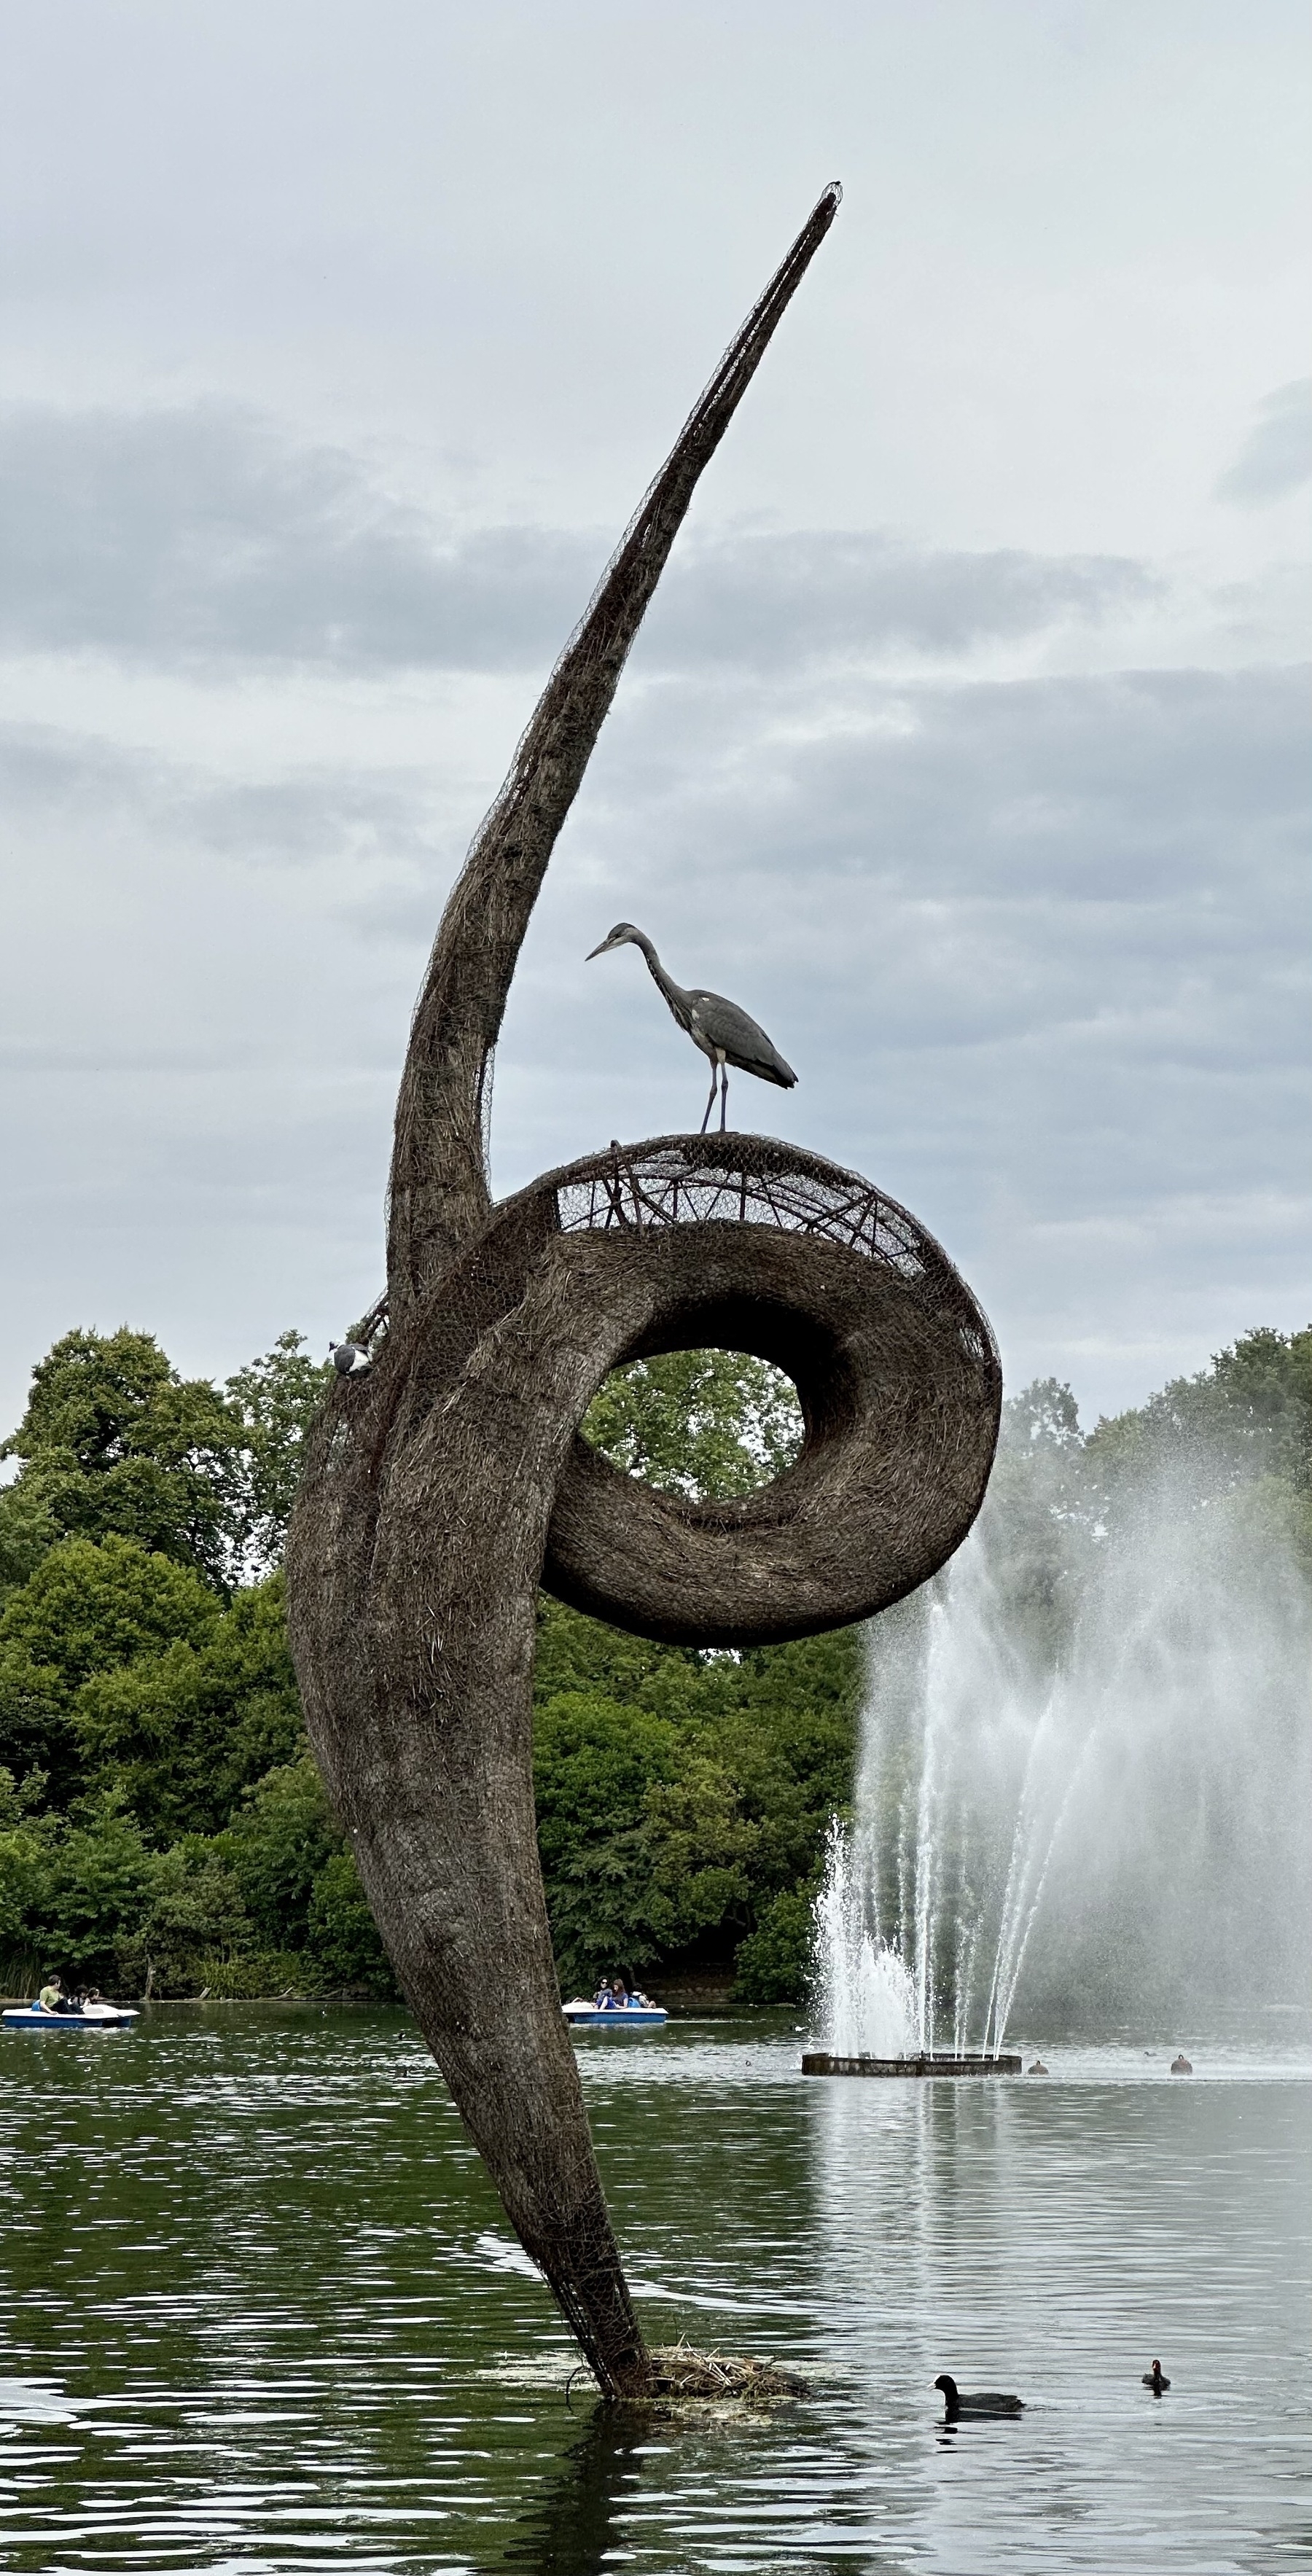 A heron perched on top of an abstract sculpture in a lake.